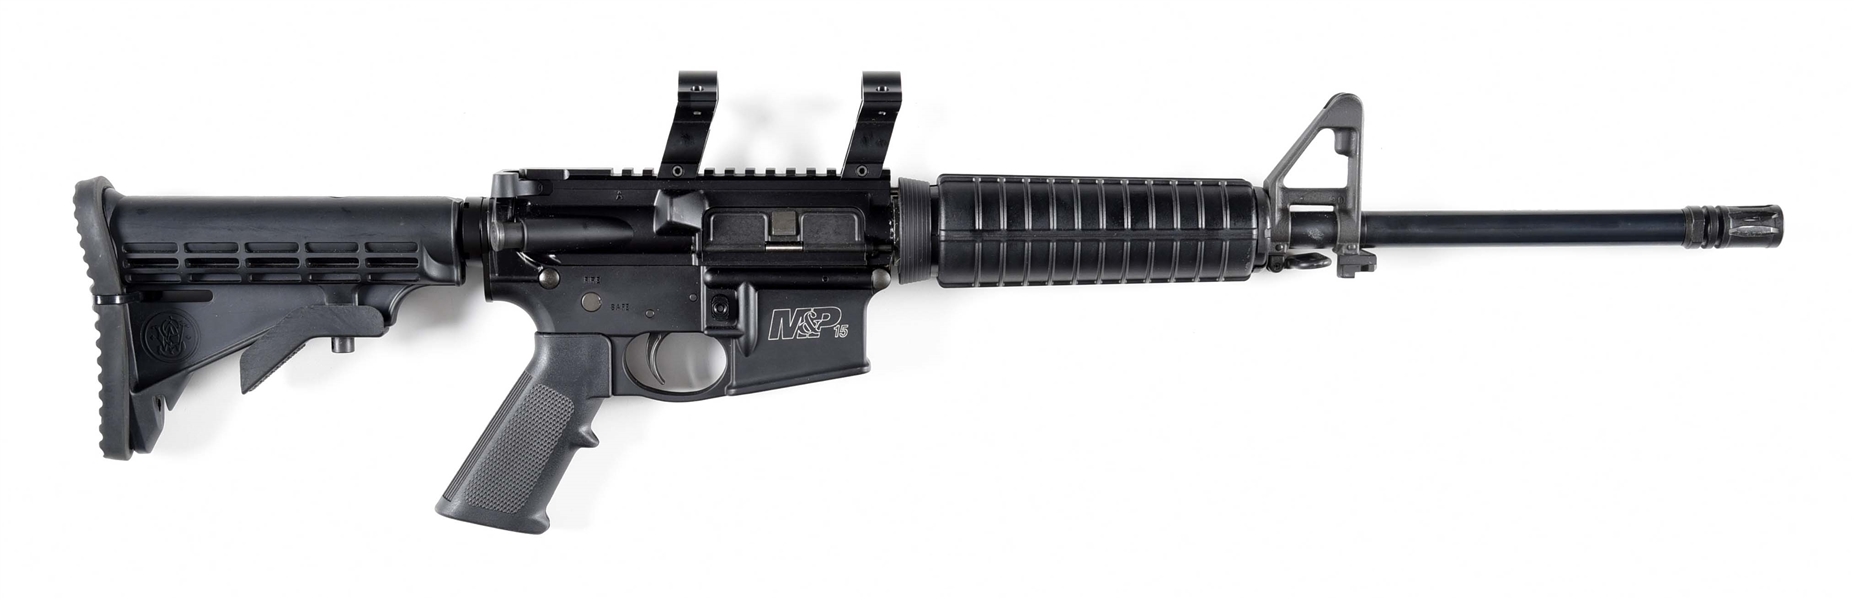 (M) SMITH AND WESSON M&P 15 SEMI AUTOMATIC RIFLE.